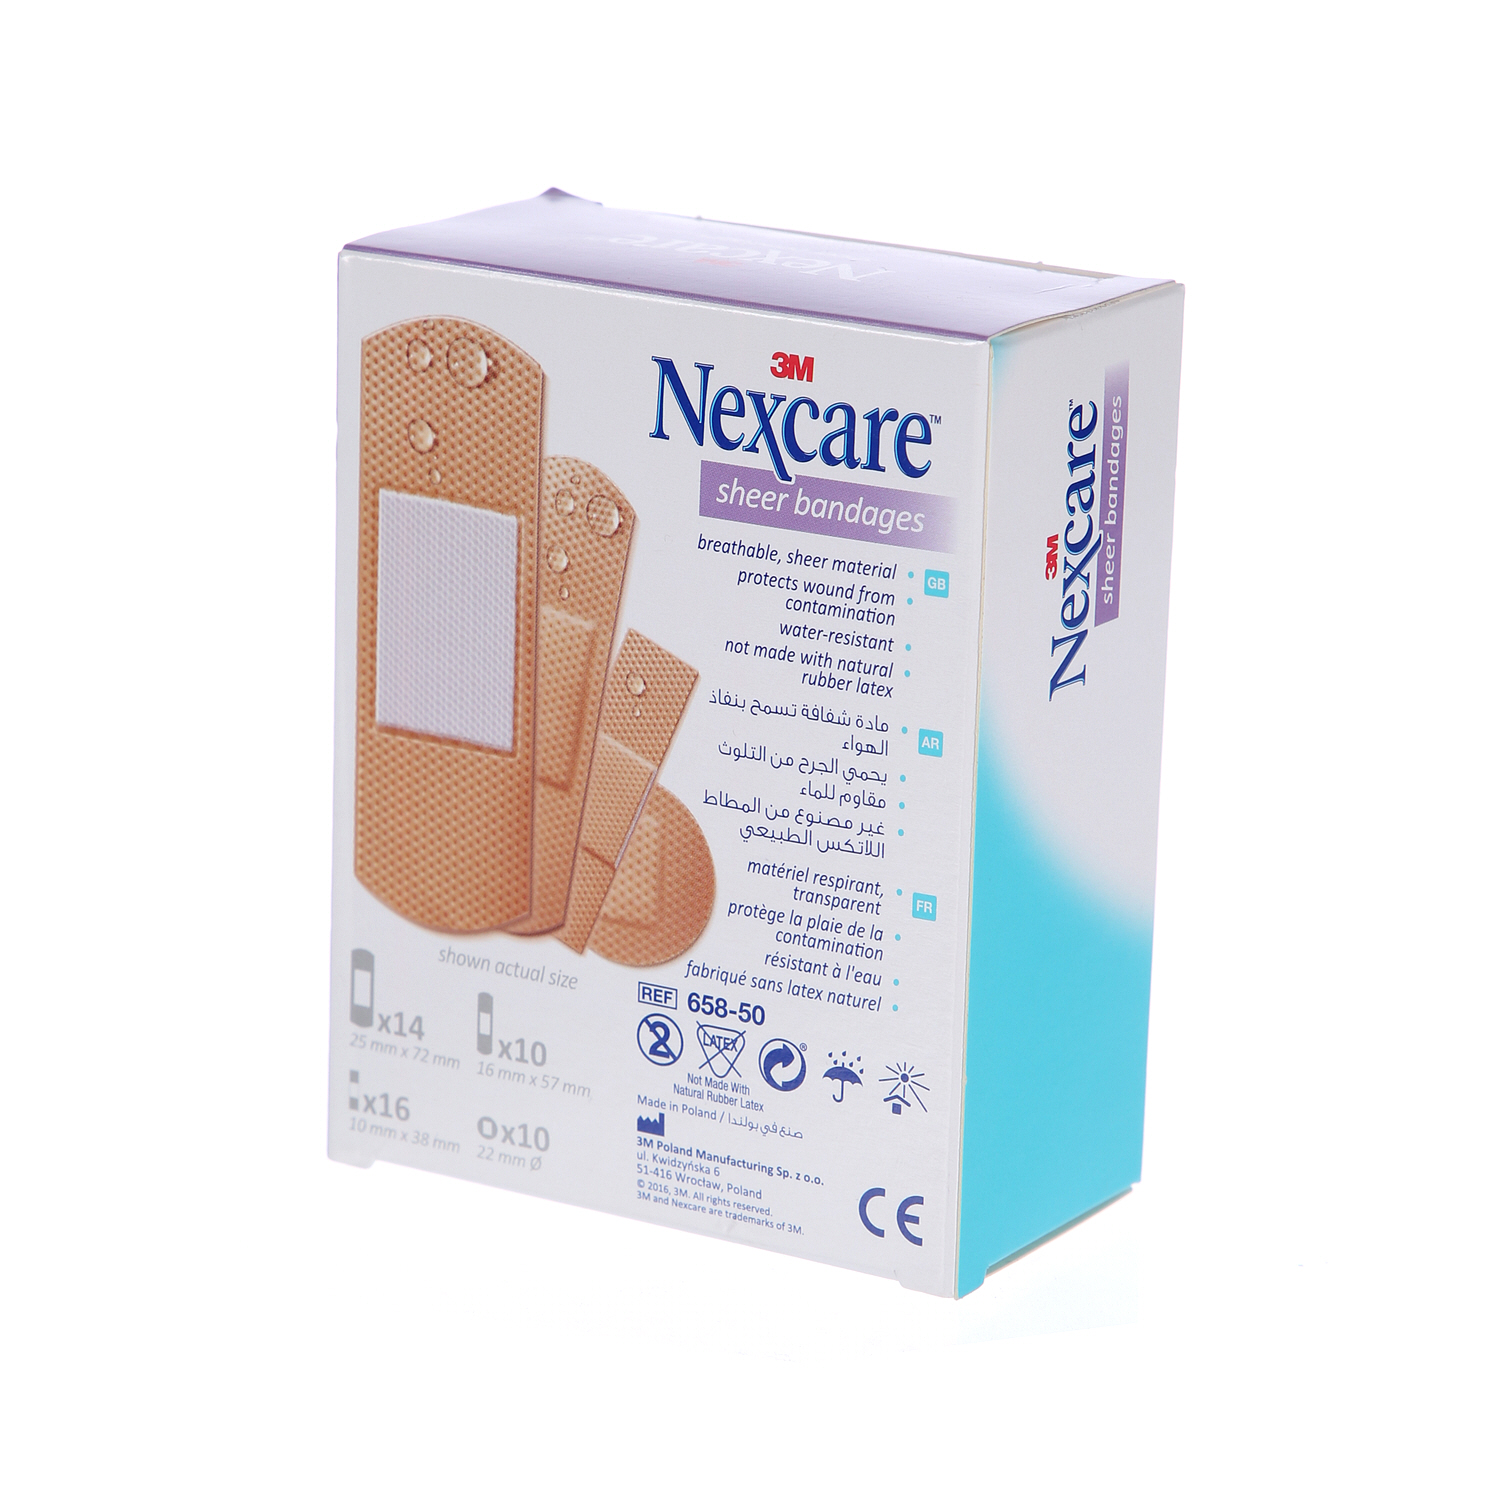 3M Nexcare Clear Waterproof Bandage 50 Pieces